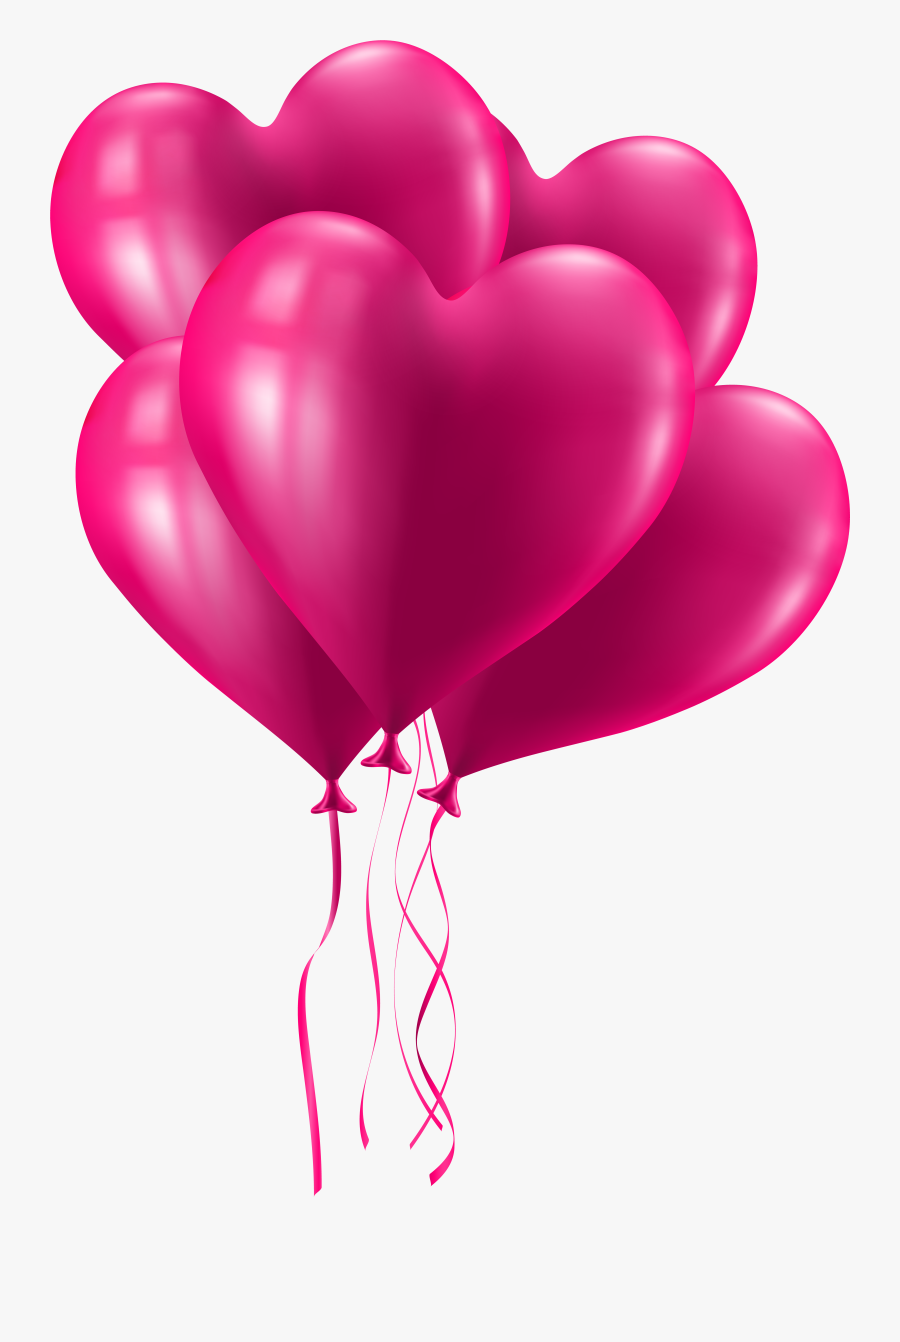 Clip Download Valentines Day Clipart Images - Pink Balloons Transparent Background, Transparent Clipart